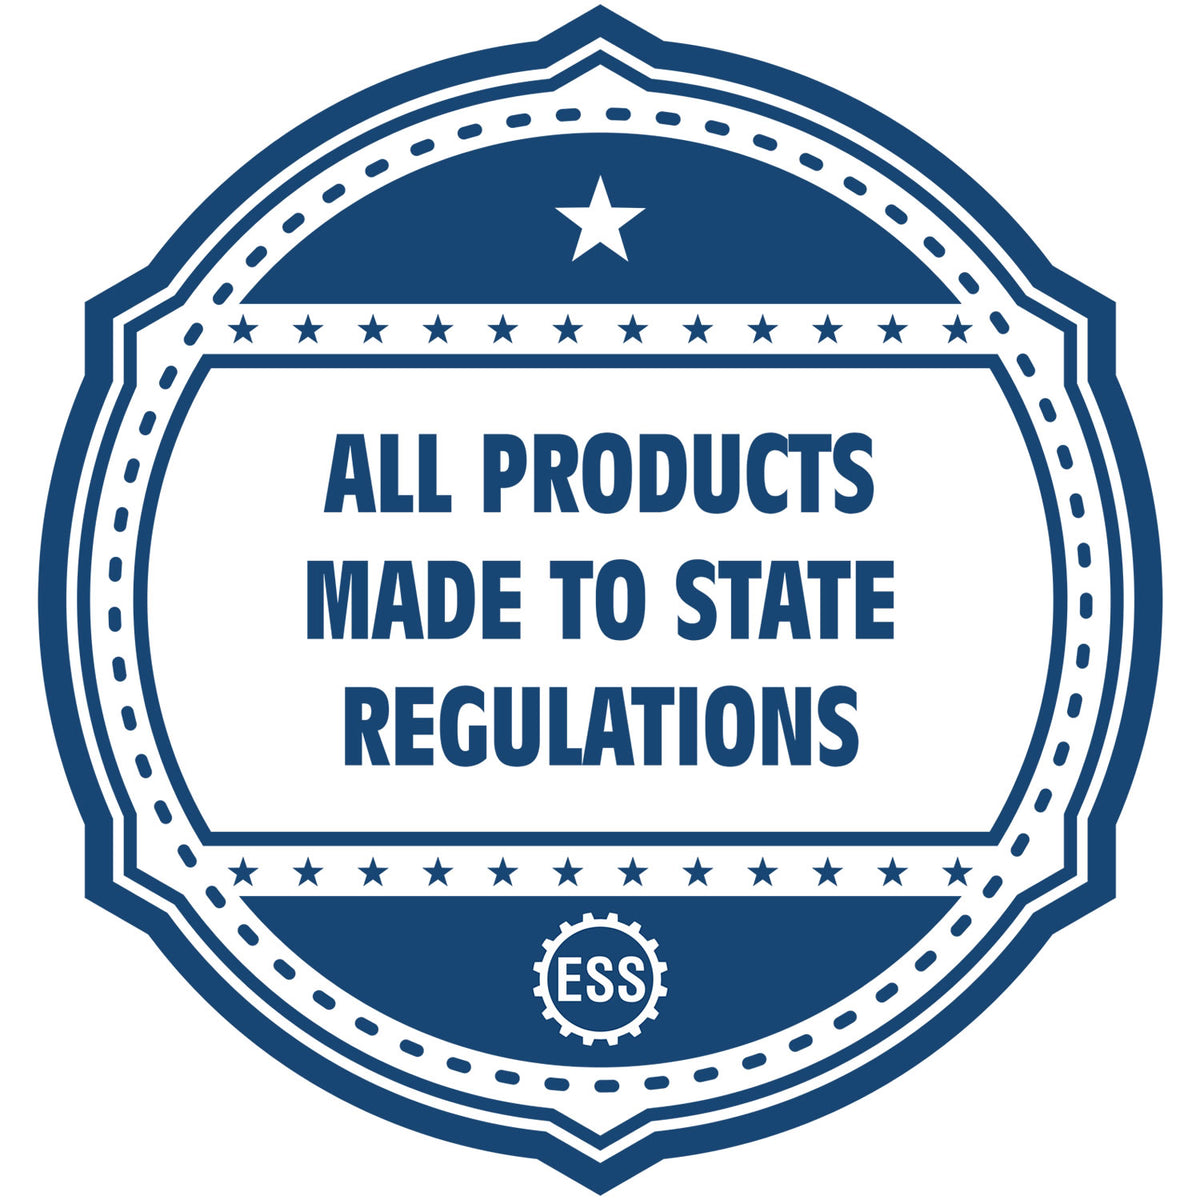 An icon or badge element for the State of Minnesota Architectural Seal Embosser showing that this product is made in compliance with state regulations.